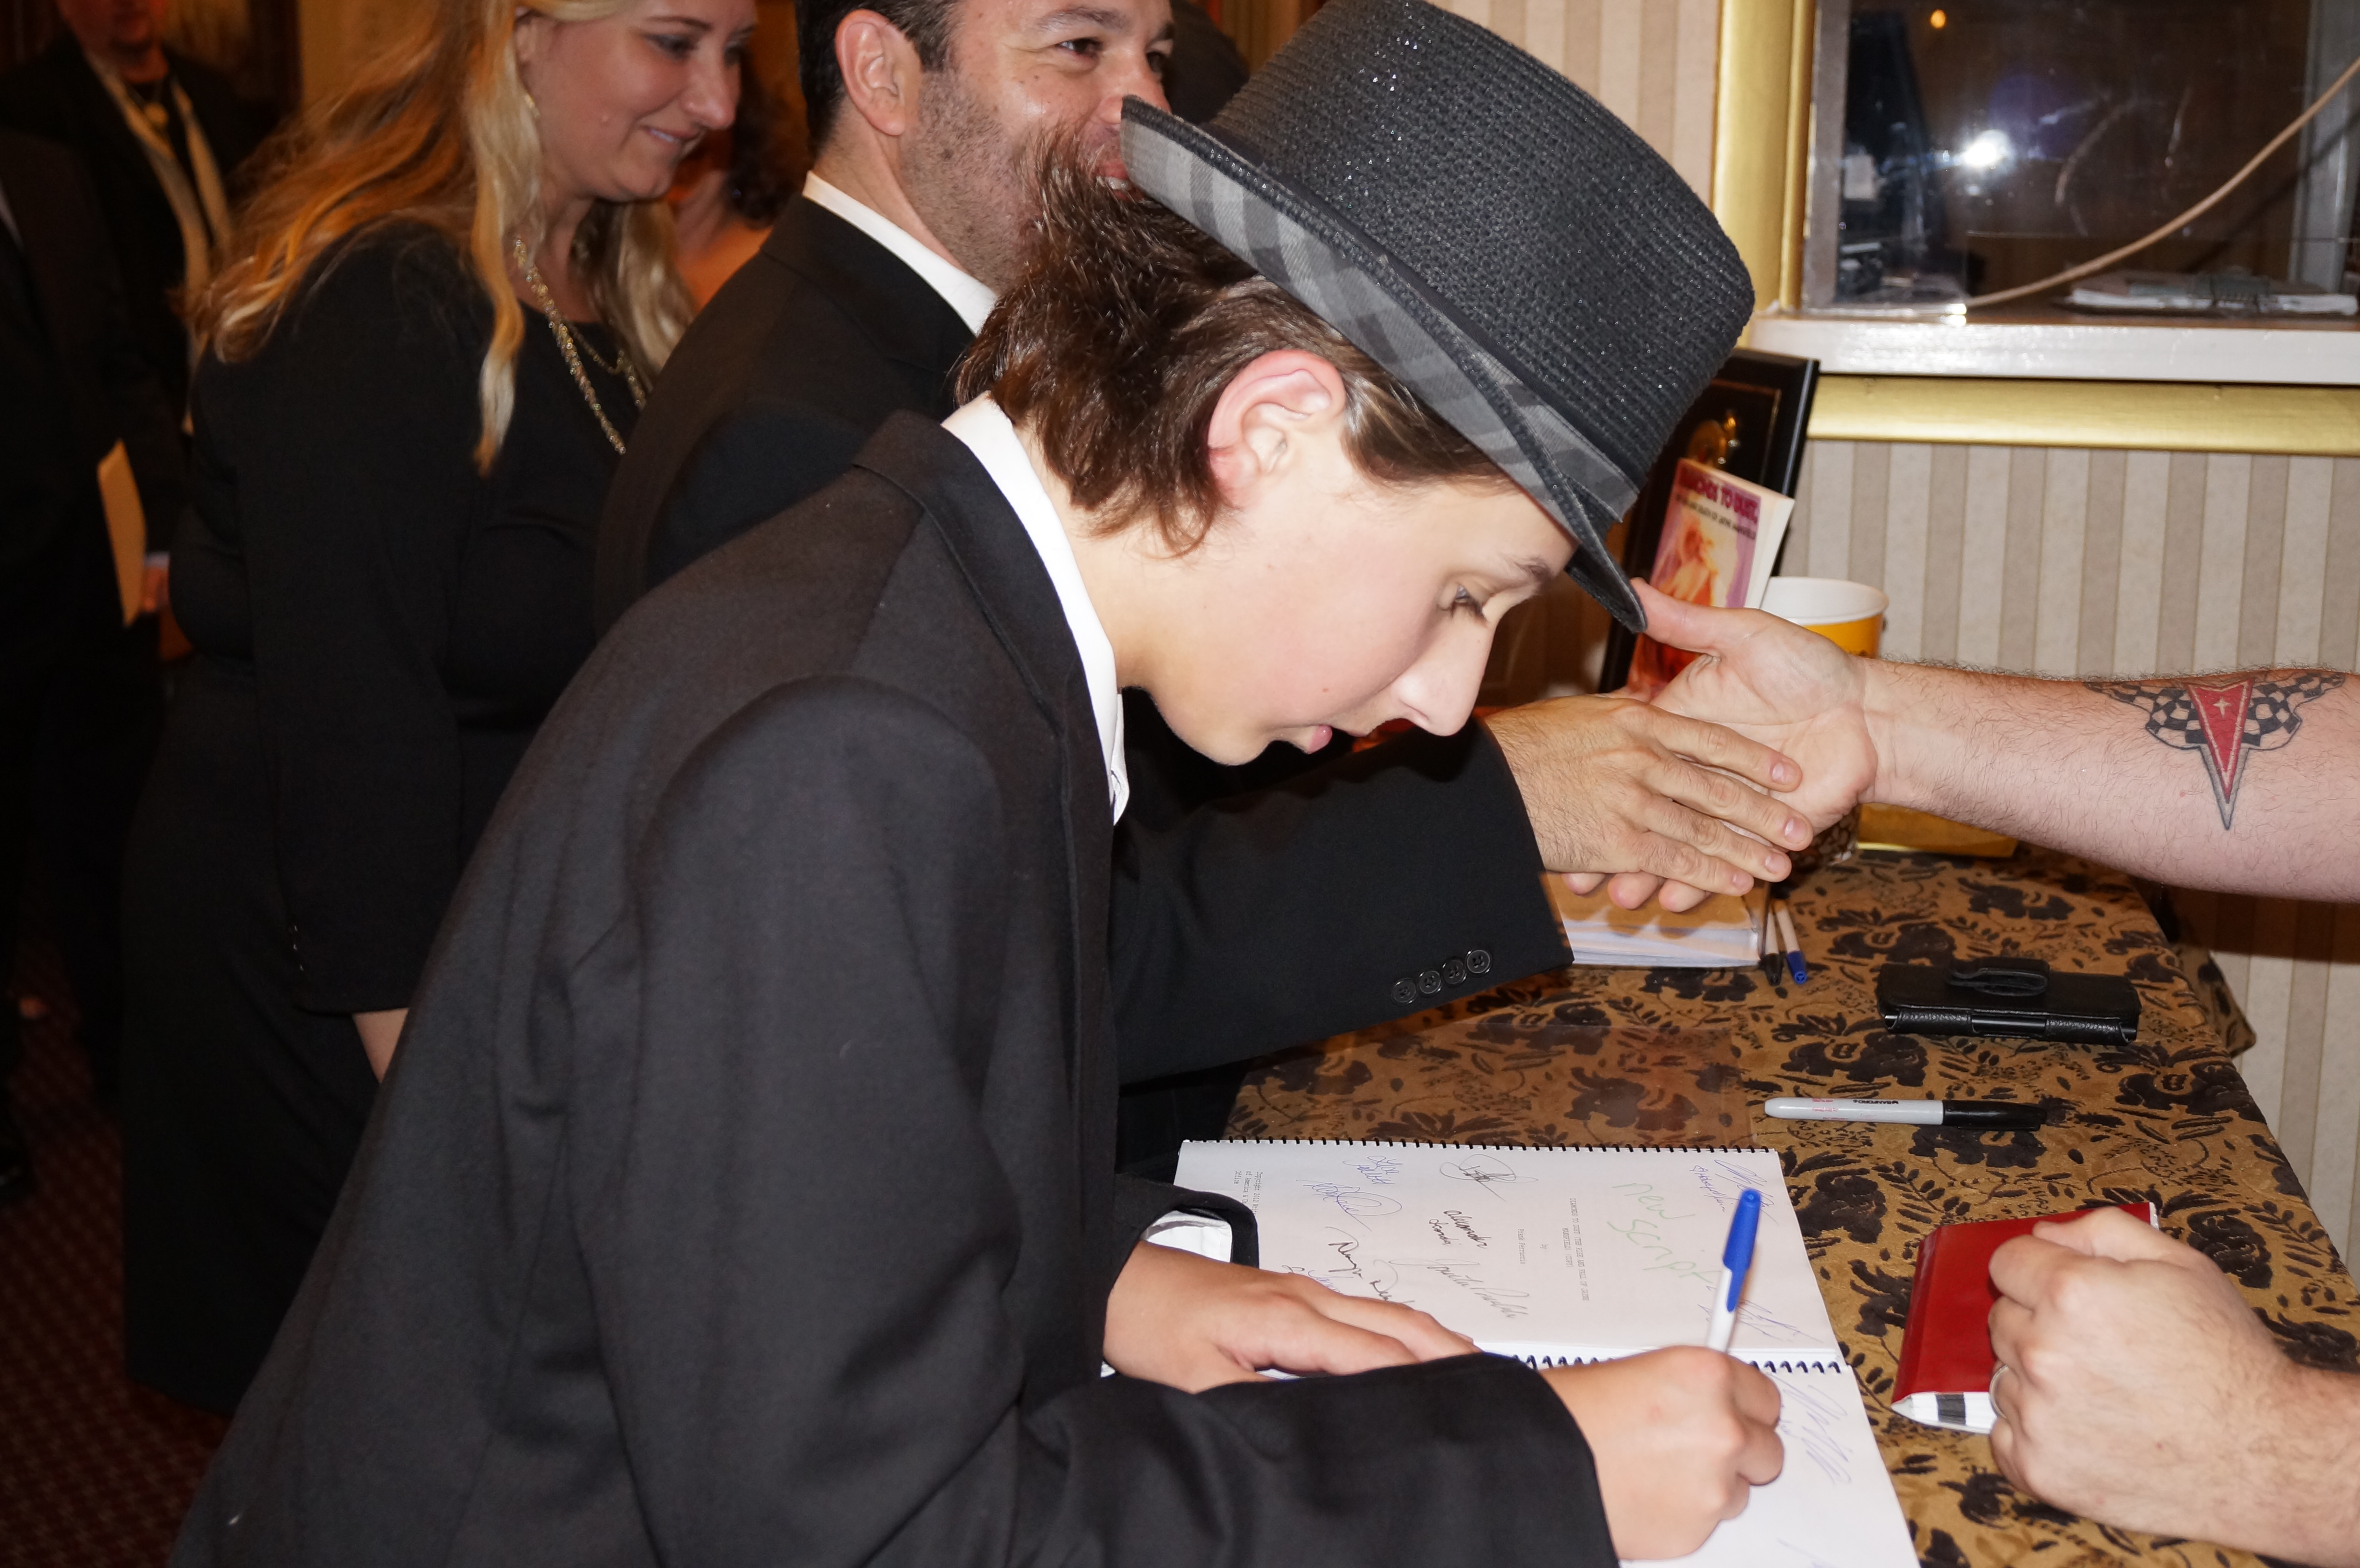 Brady Bryson signing copies of the script for auction after the premiere of 